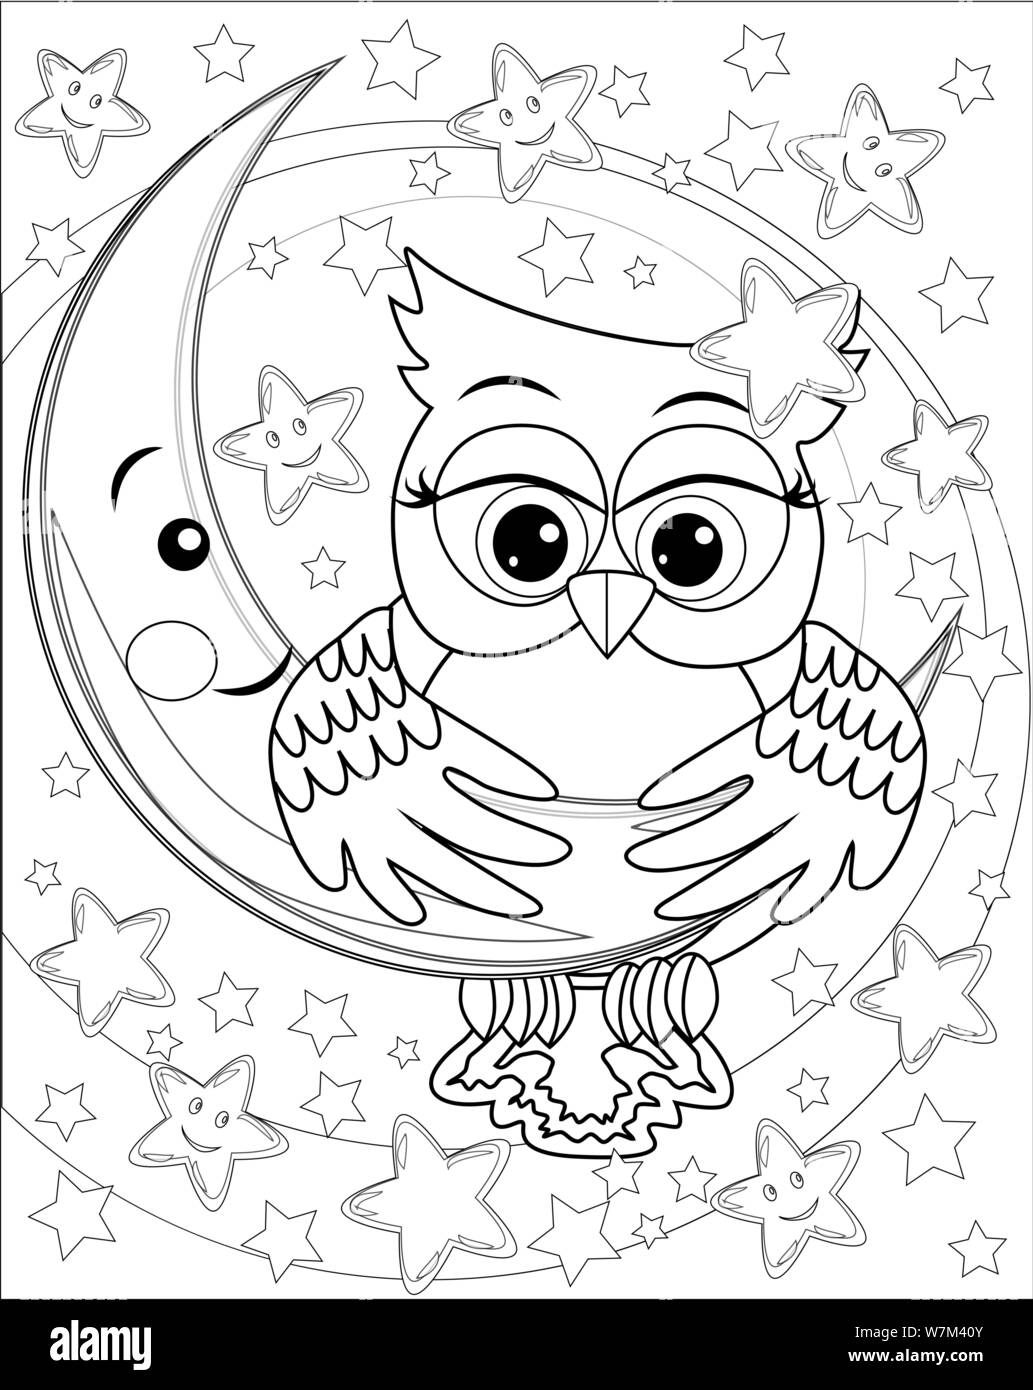 Coloring book for adult and older children. Coloring page with an ...